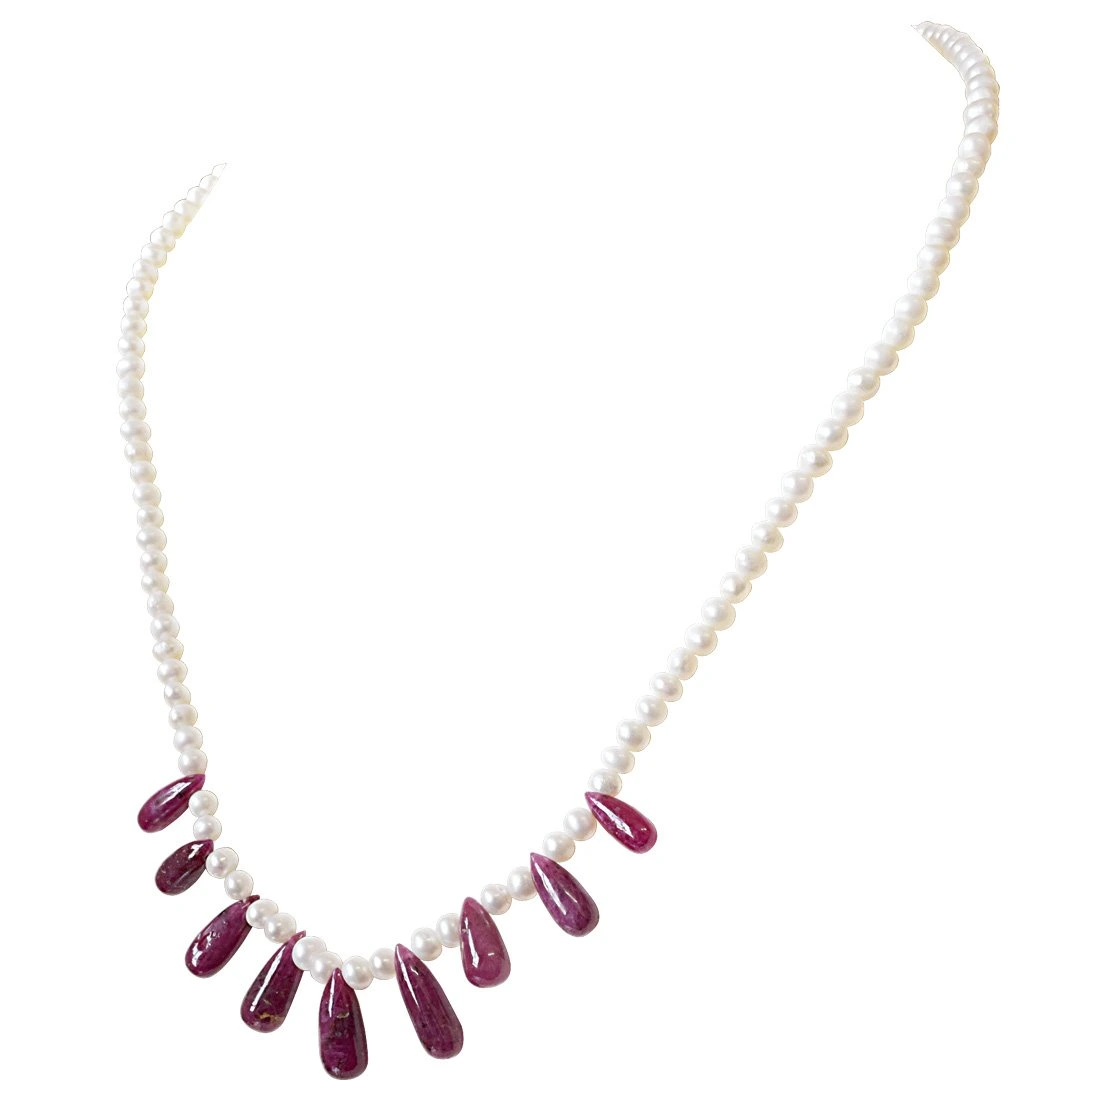 9 Red Pearl Real Drop Ruby and Freshwater Necklace for Women Set of 9 Pieces (SN939)